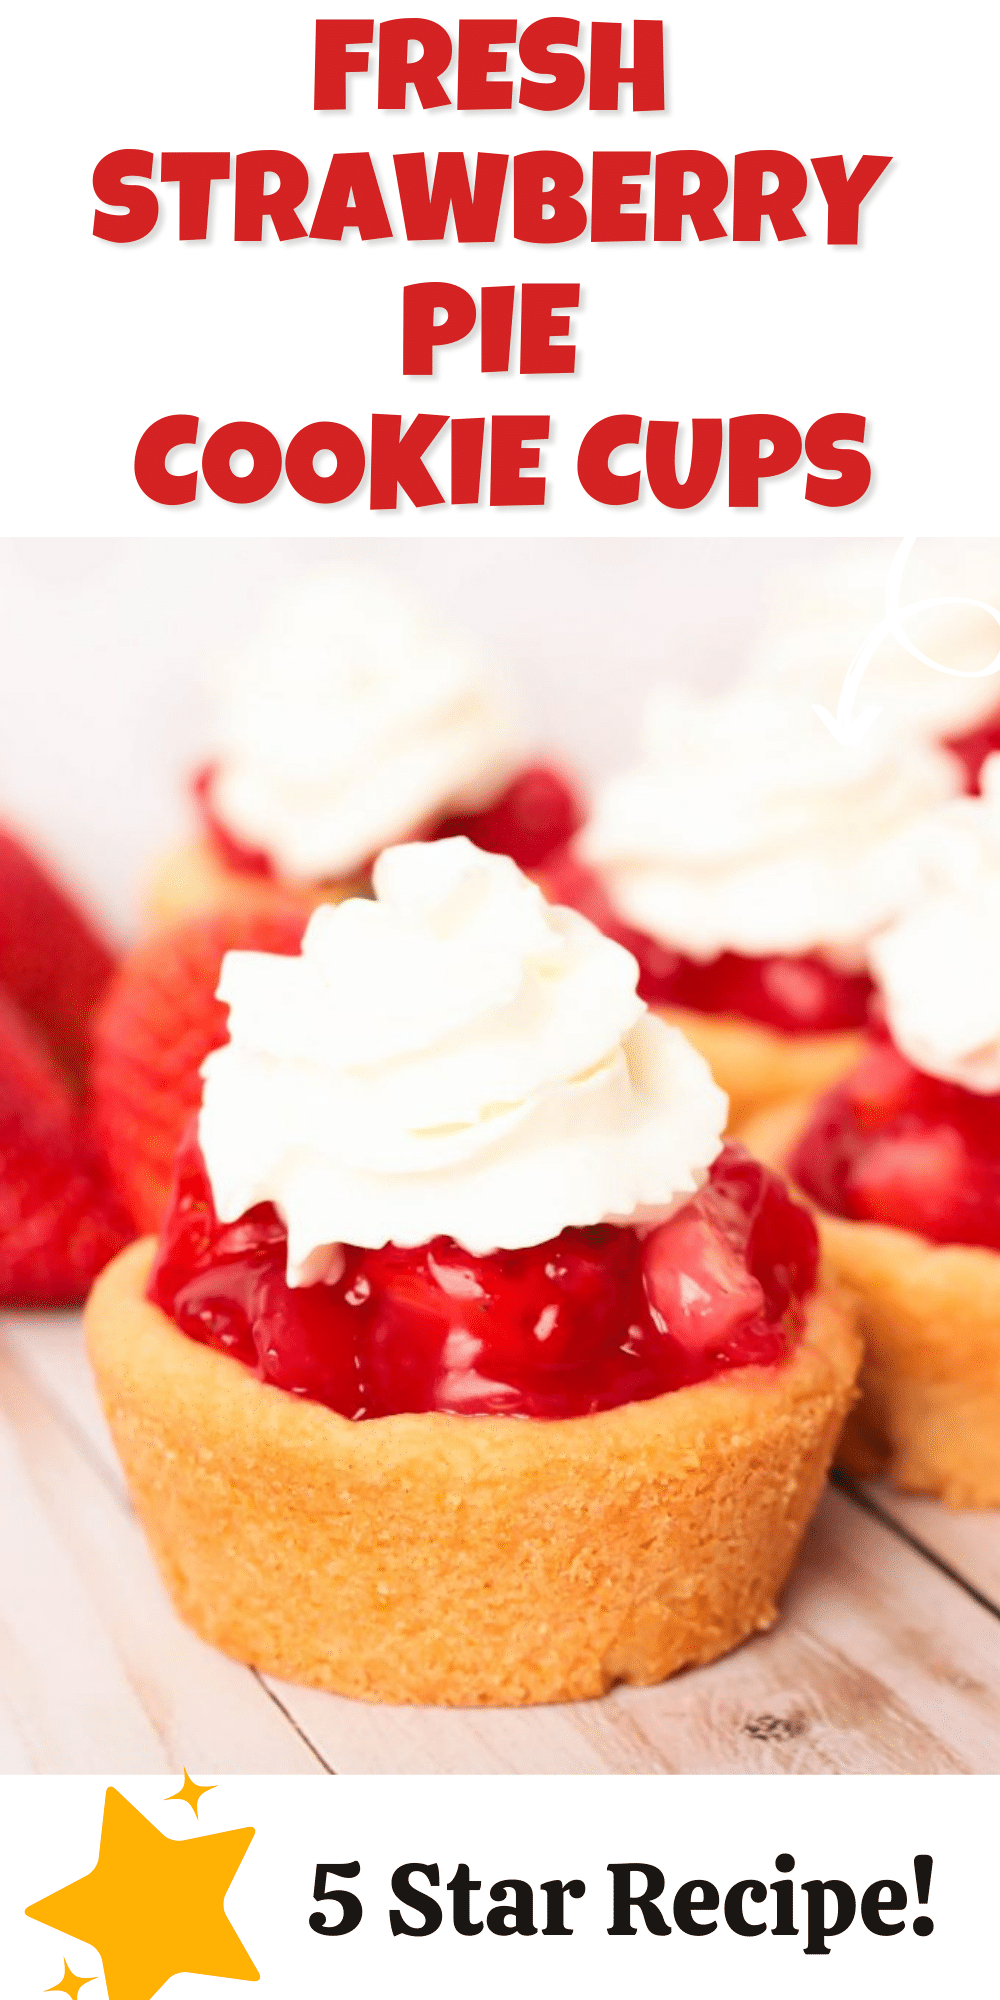 Serve up a beautiful bite of spring with these super easy Fresh Strawberry Pie Cookie Cups! Sugar cookie crusts with a homemade strawberry pie filling, oh and this strawberry glaze doesn’t have Jello in it!

 via @bigbearswife